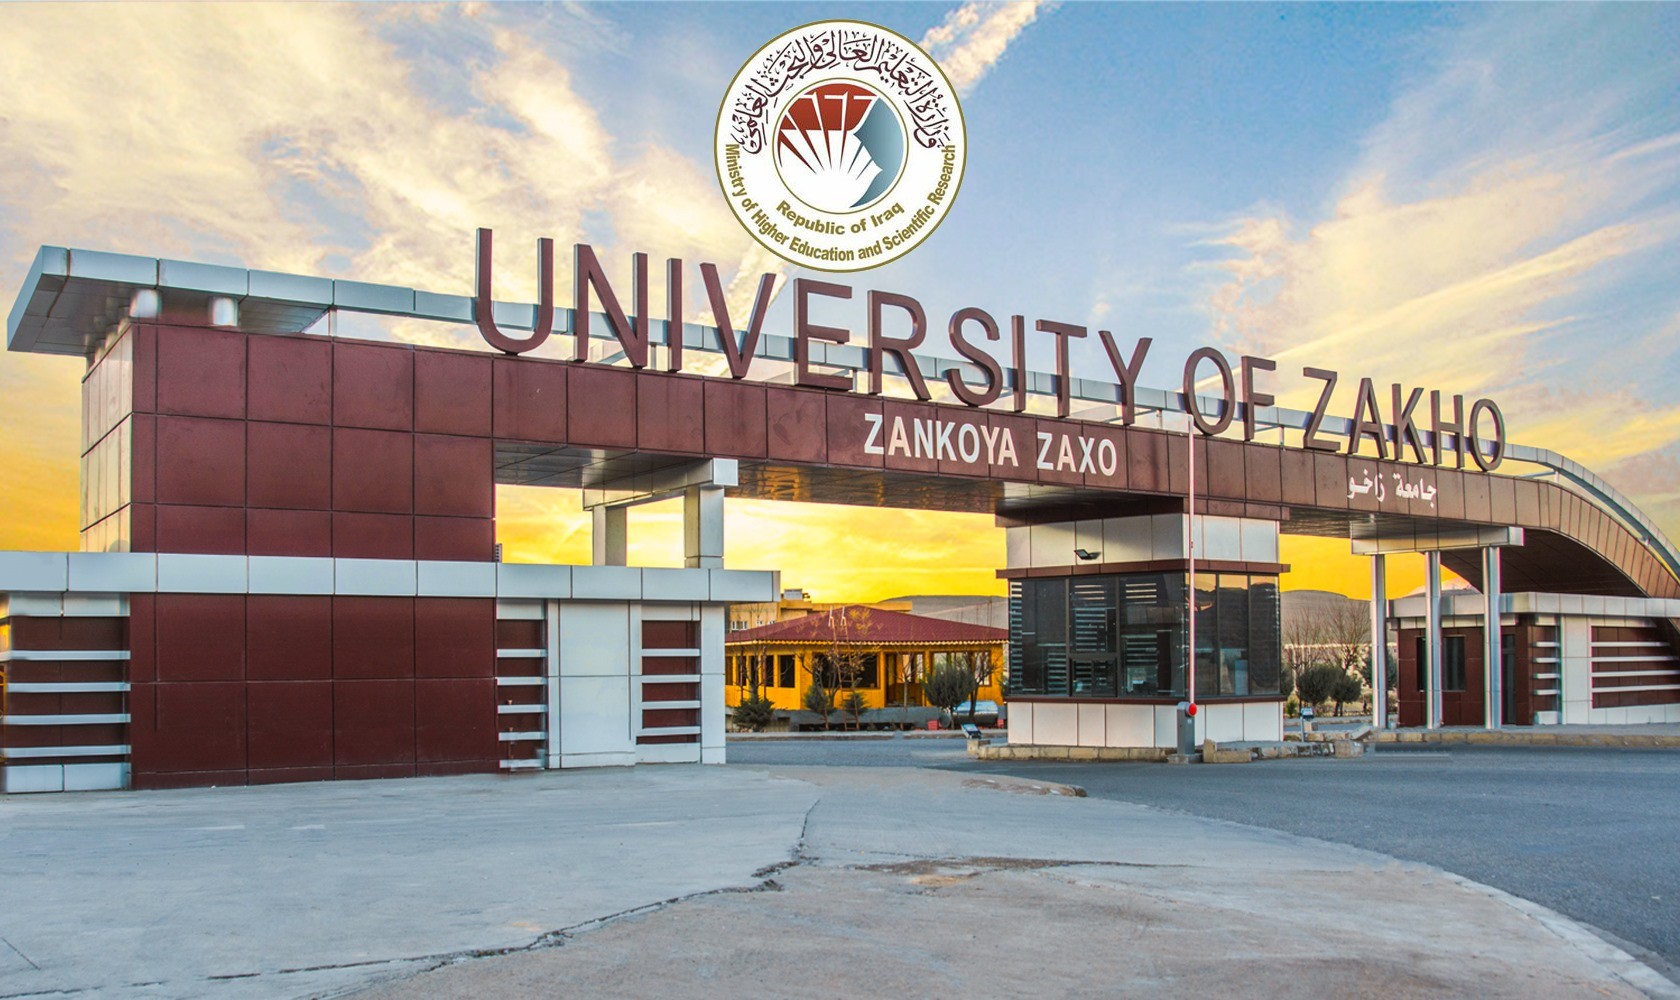 University Of Zakho Has Been Officially Admitted By The Iraqi Ministry of Higher Education & Scientific Research